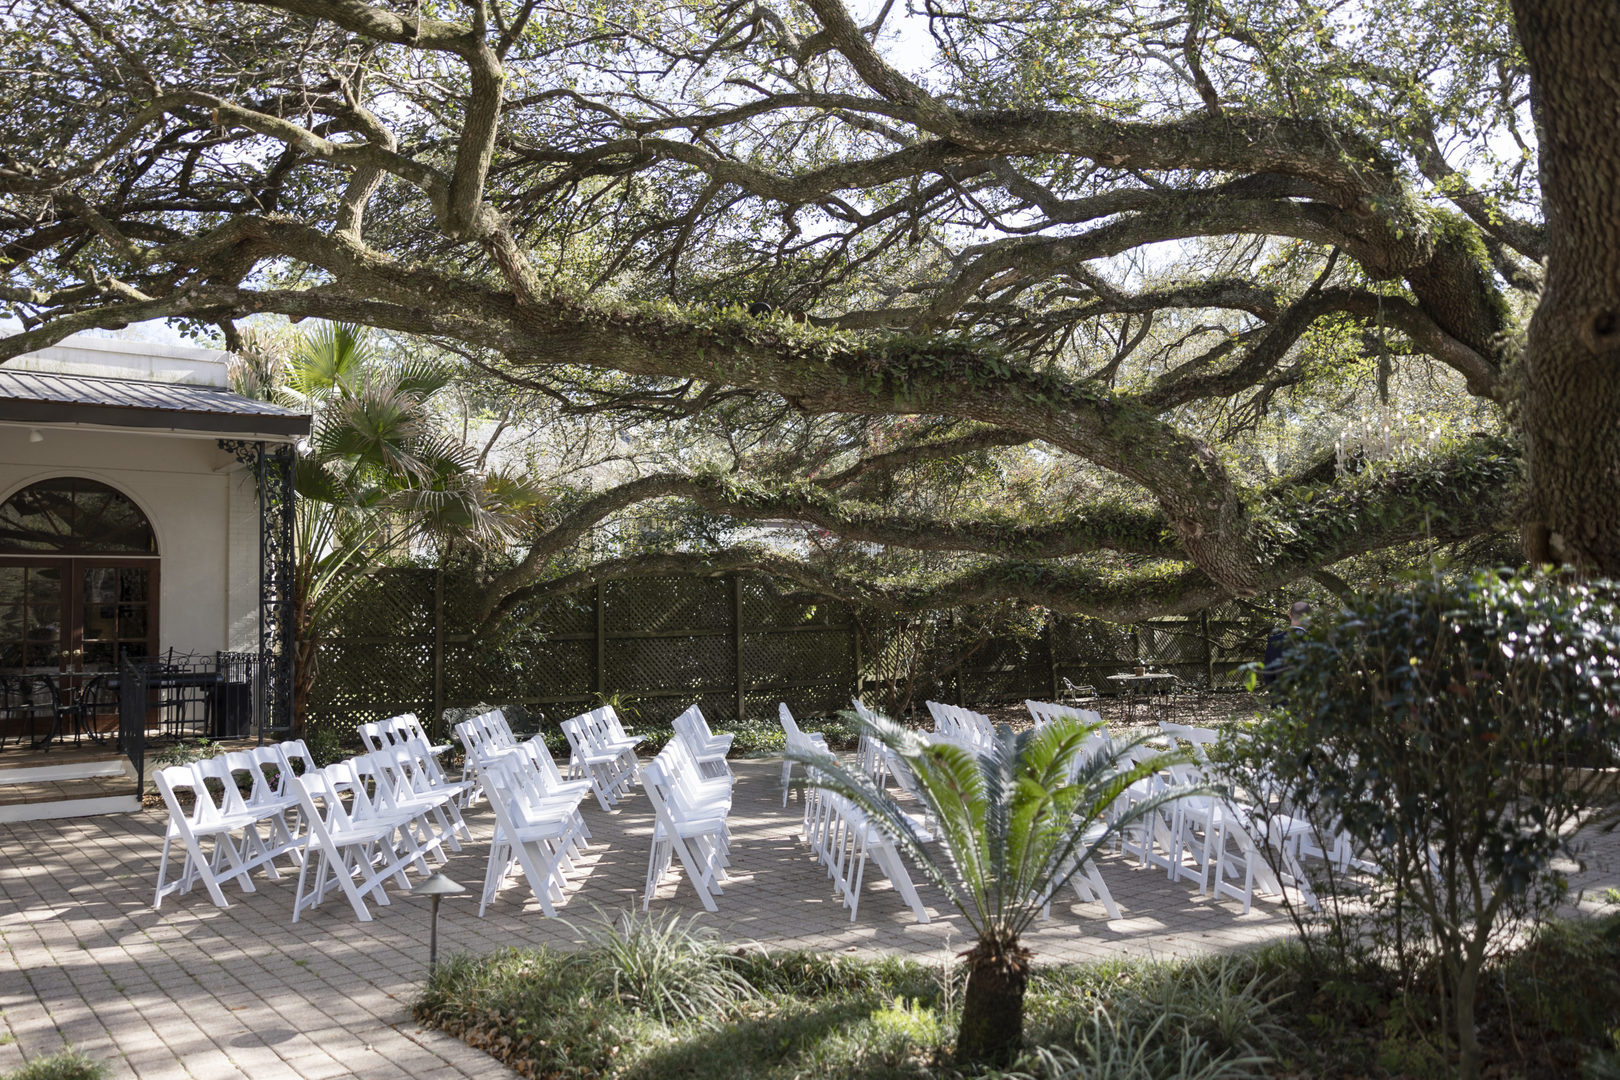 Wedding ceremony setup for a Vintage Court Real Wedding at the big tree in the courtyard